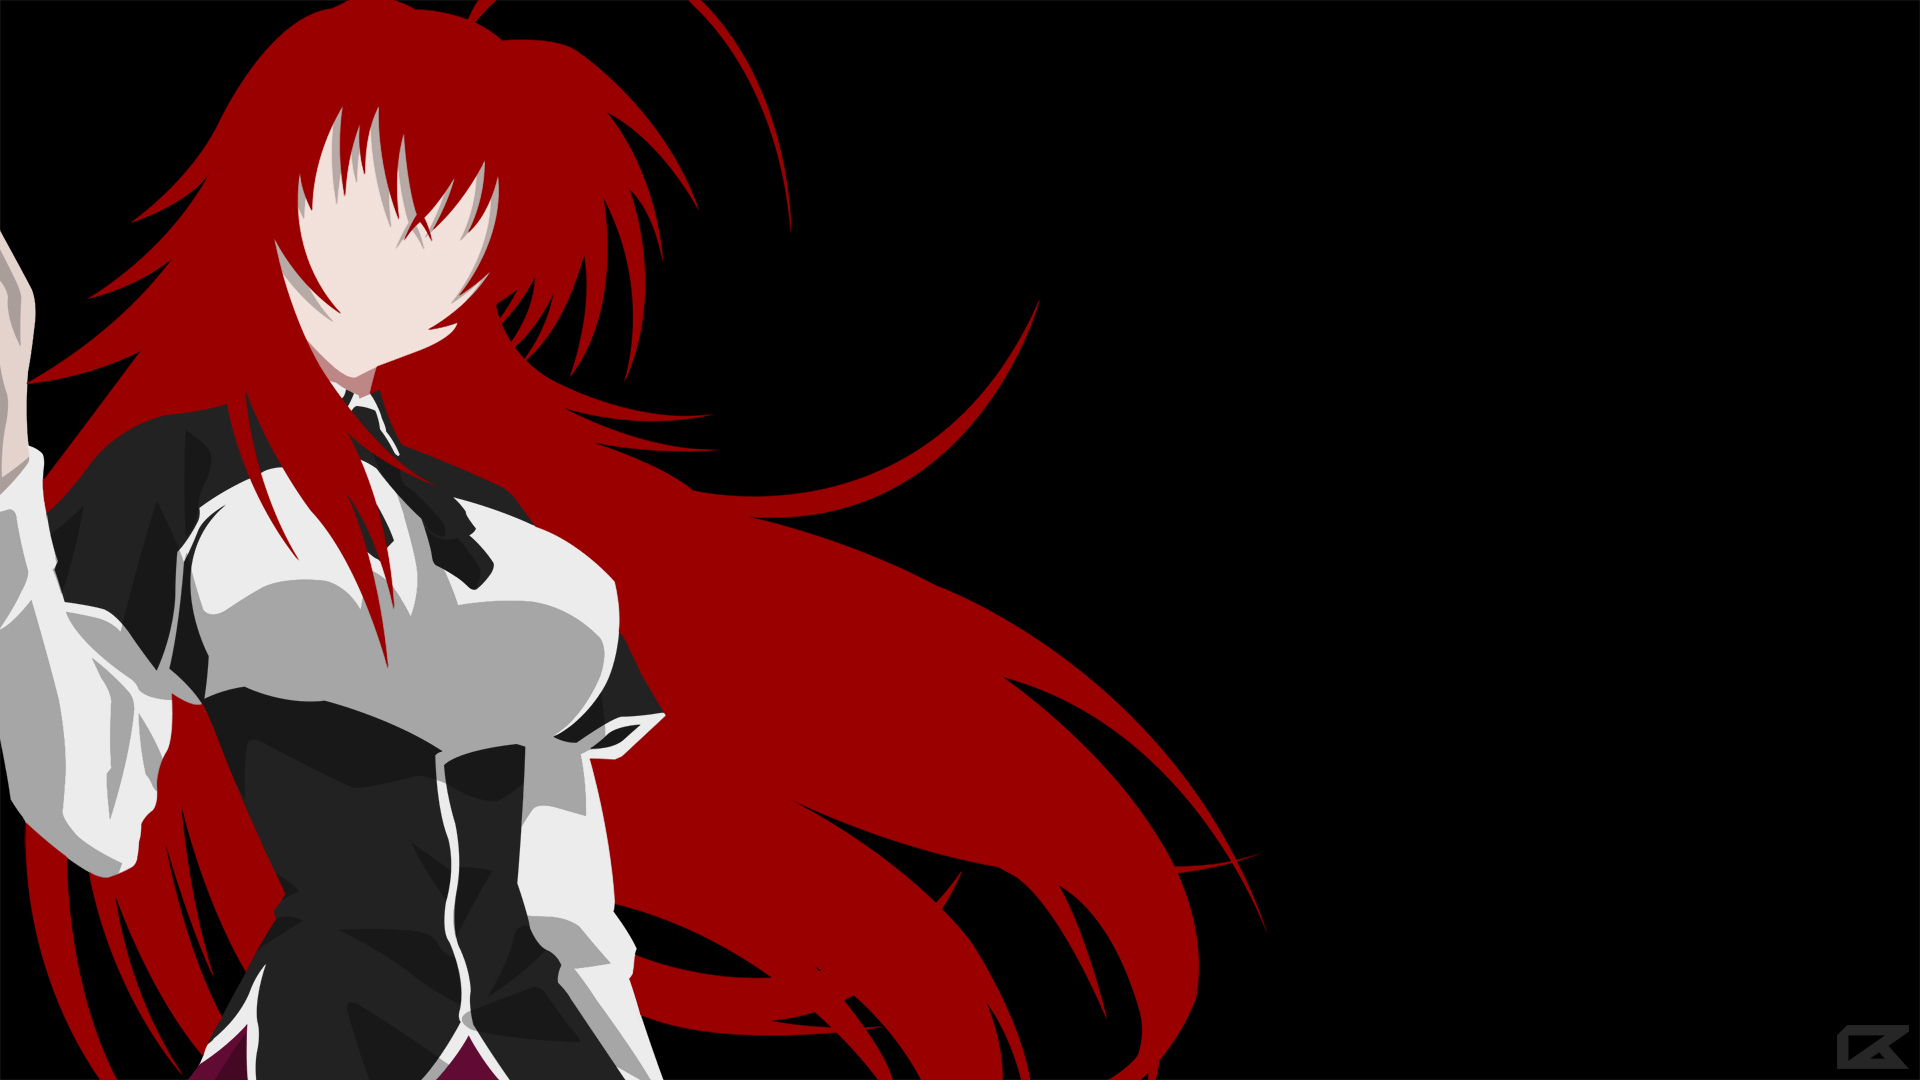 High School DxD HD Wallpapers and Backgrounds. 